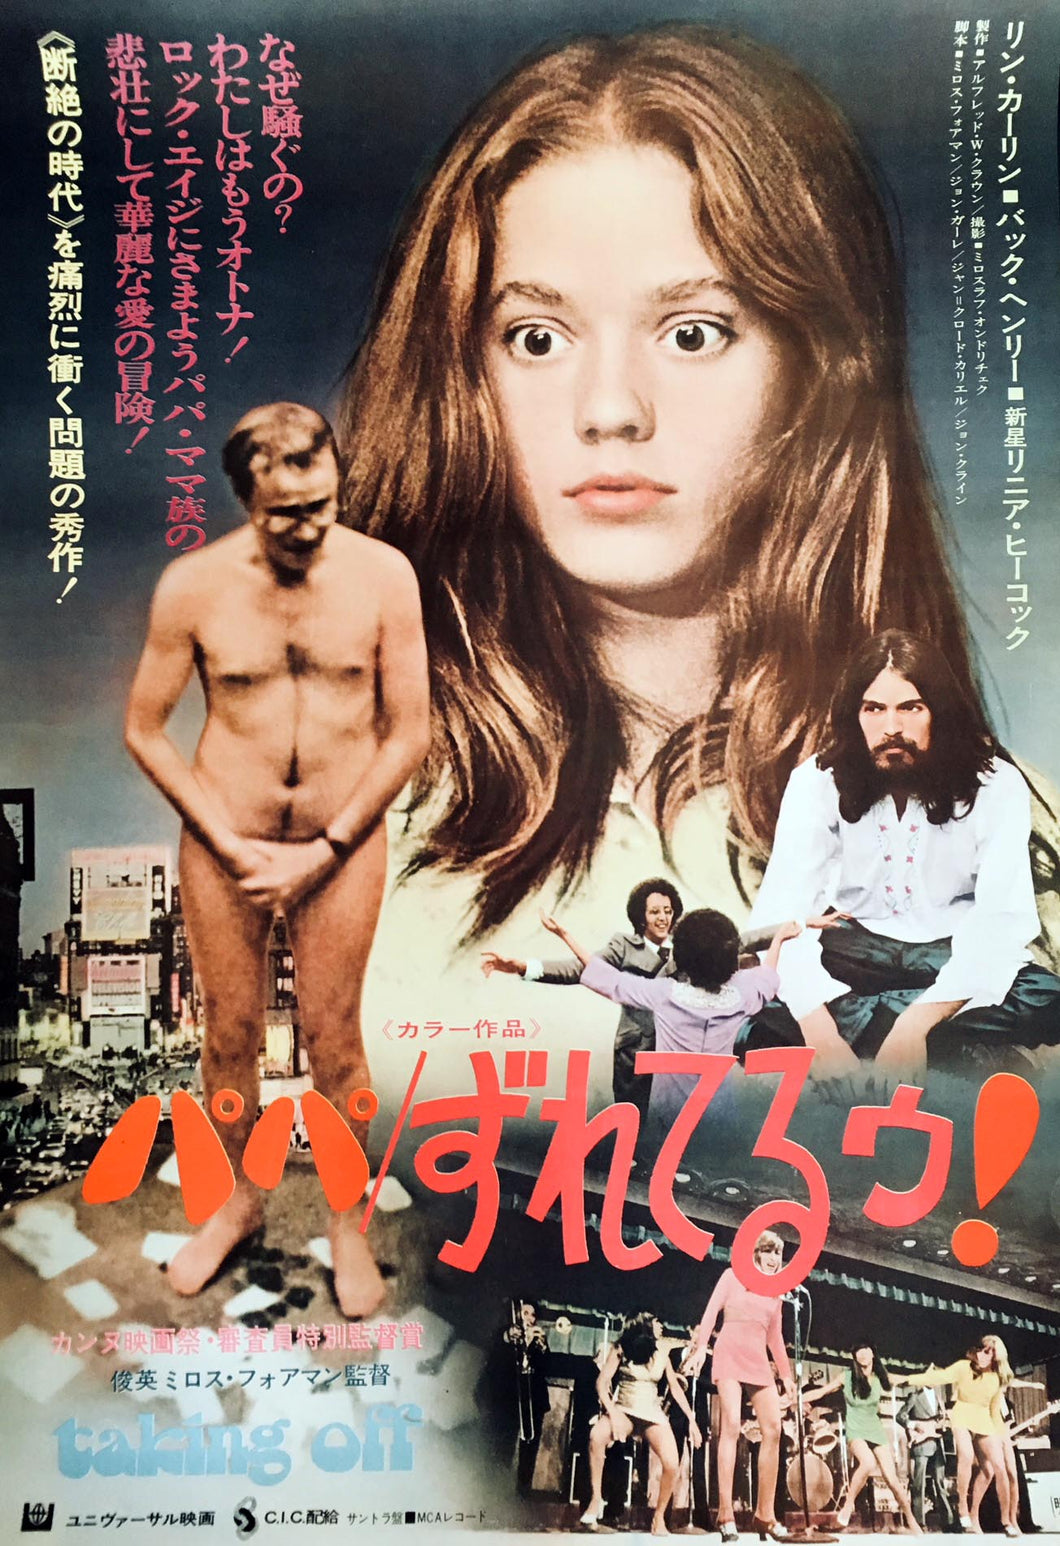 Taking Off Japanese Movie Poster for Milos Forman's U.S. Debut - Czech Film Poster Gallery